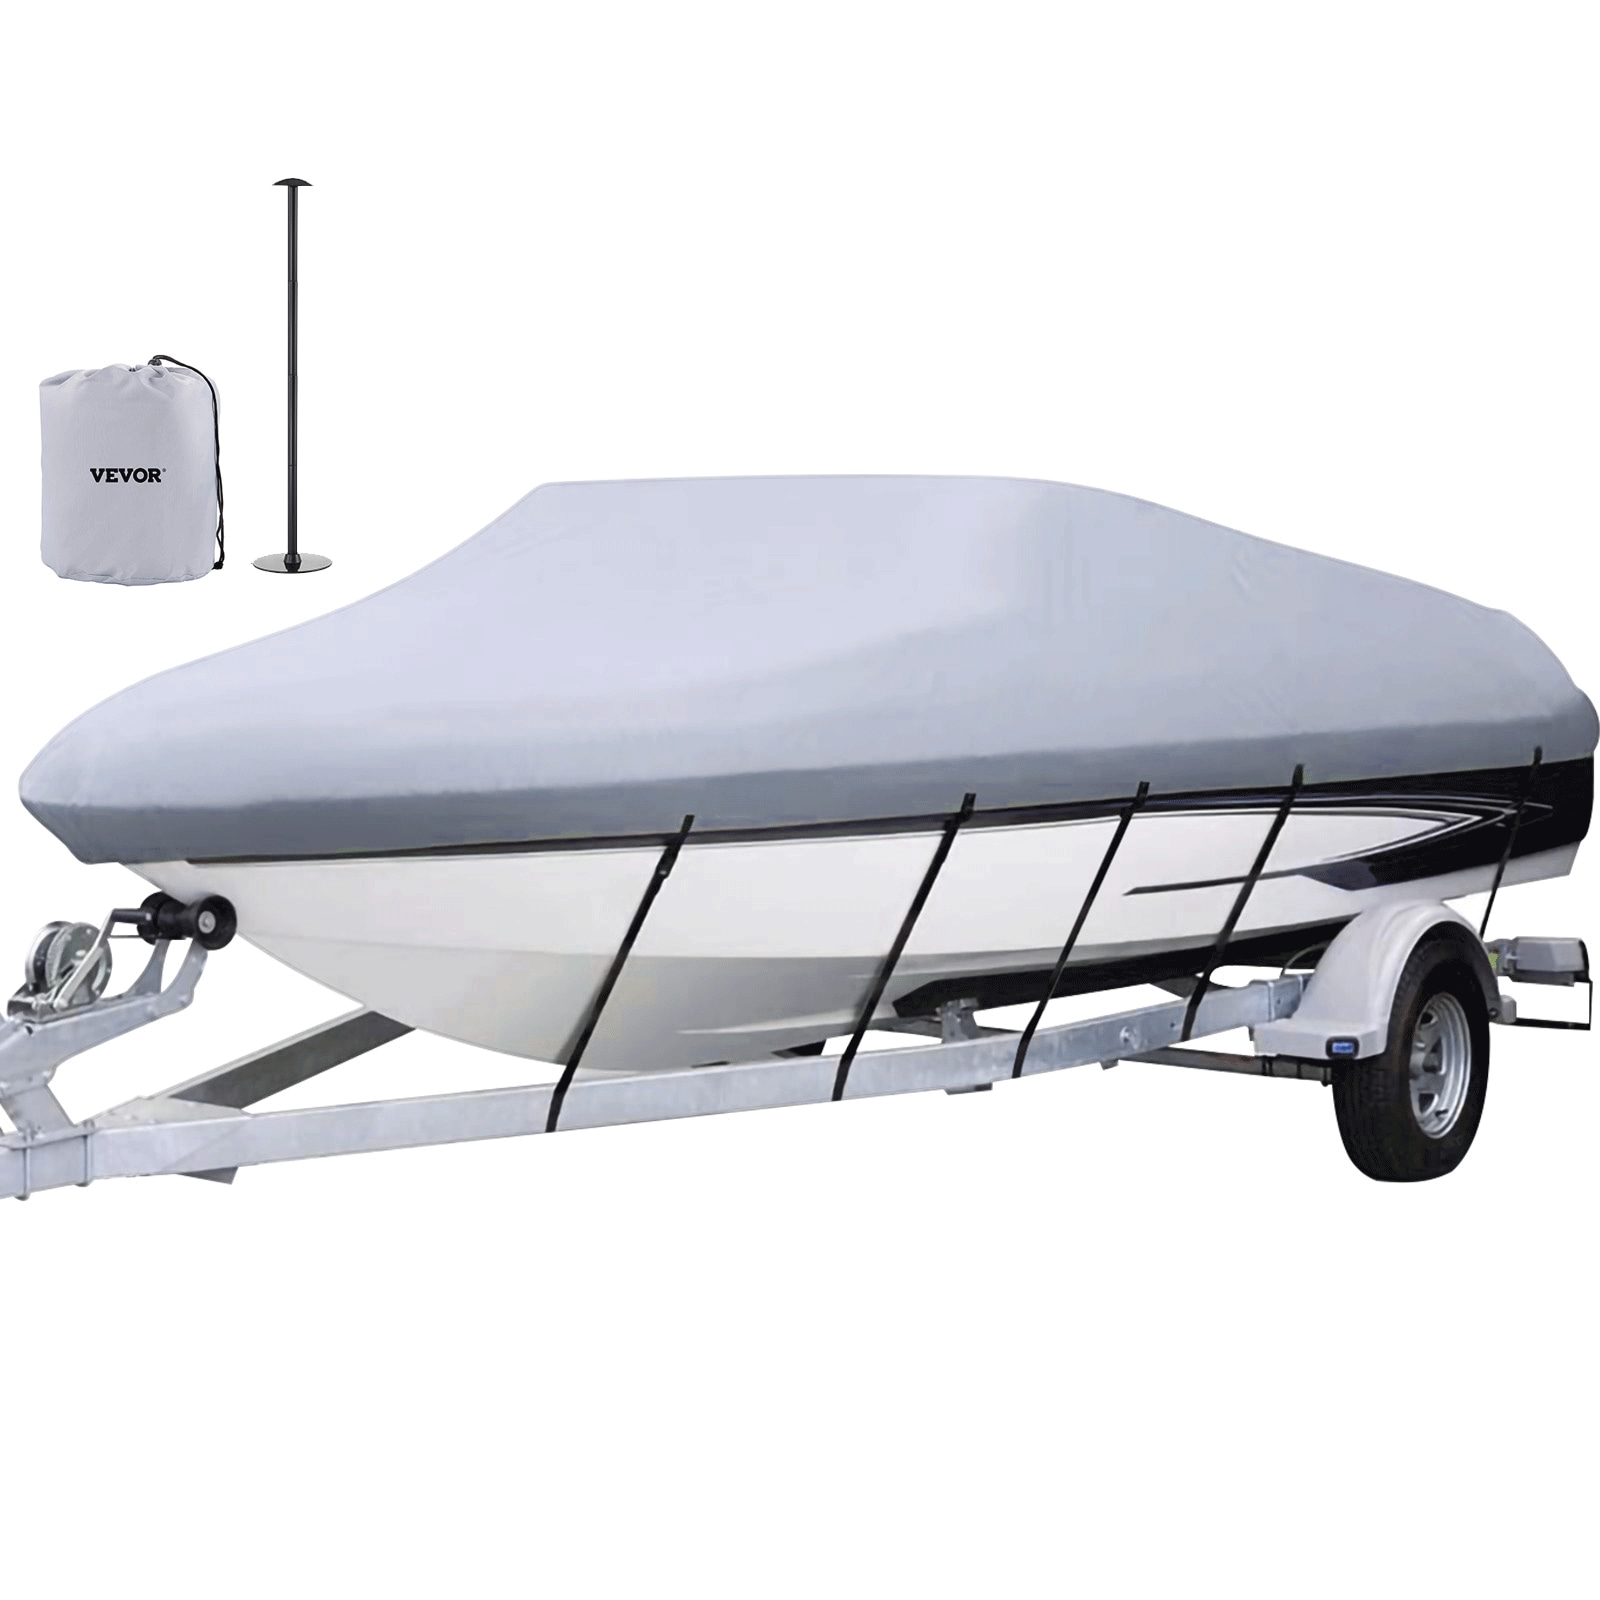 20 ft. to 22 ft. Trailerable Boat Cover V-Hull Boat Cover Waterproof 6